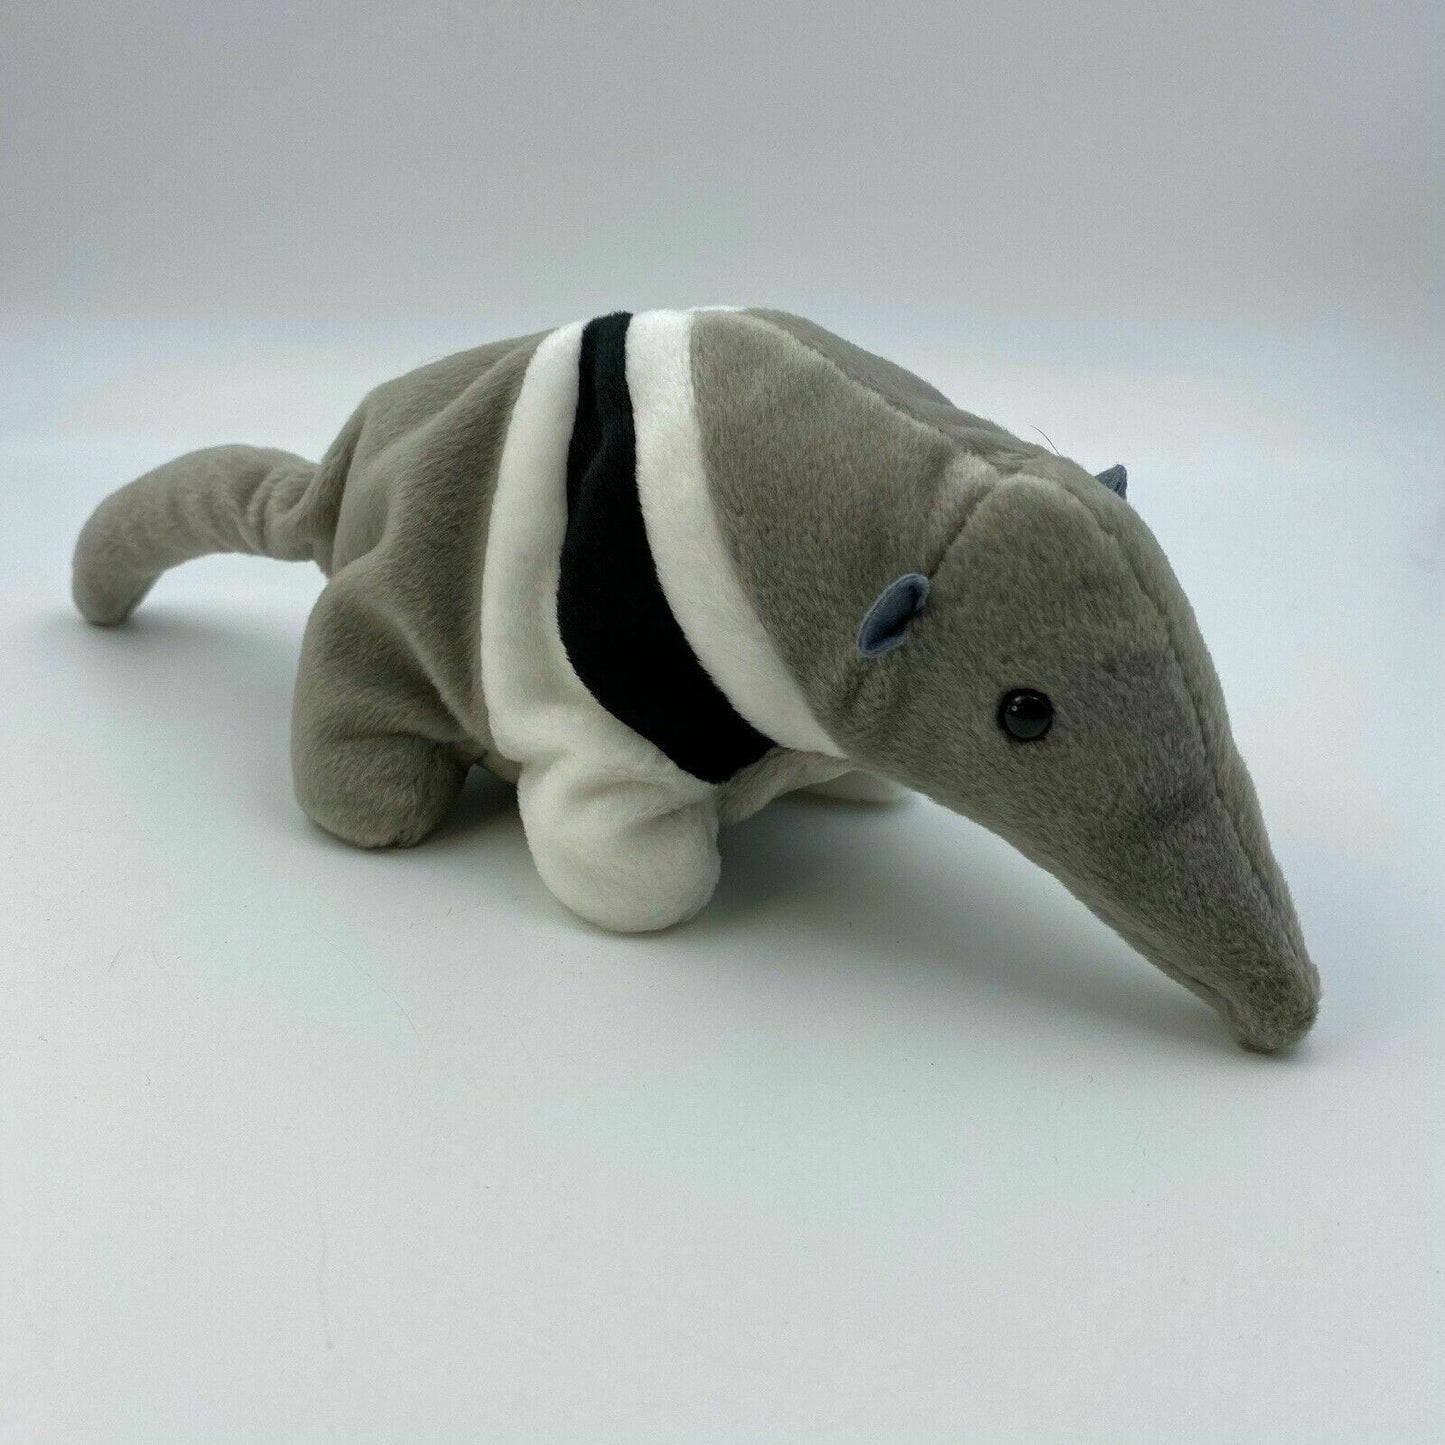 Ty Original Beanie Babies Ants The Anteater 1998 Excellent Cond. w/ Errors